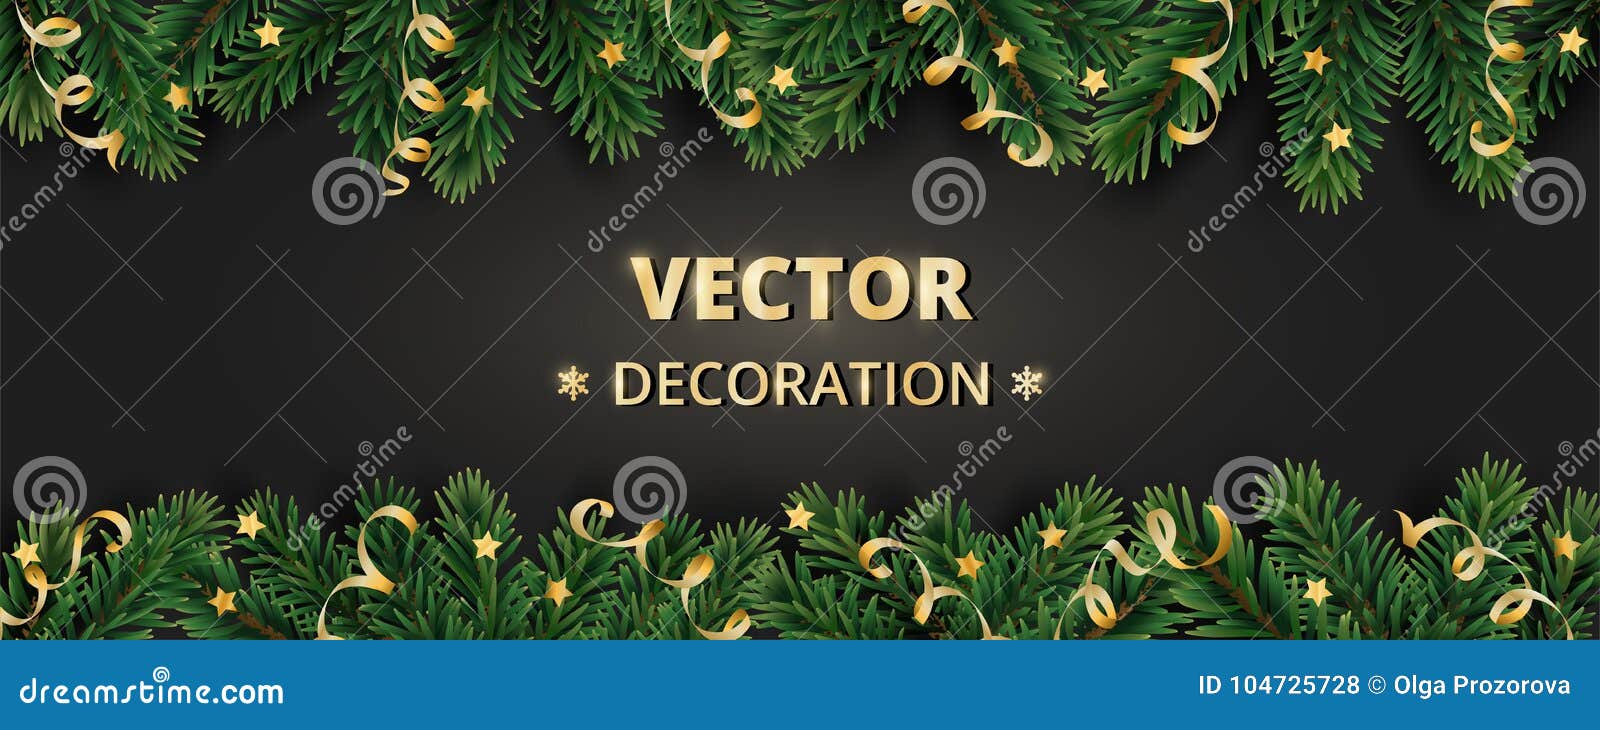 winter holiday background. border with christmas tree branches and ornaments.